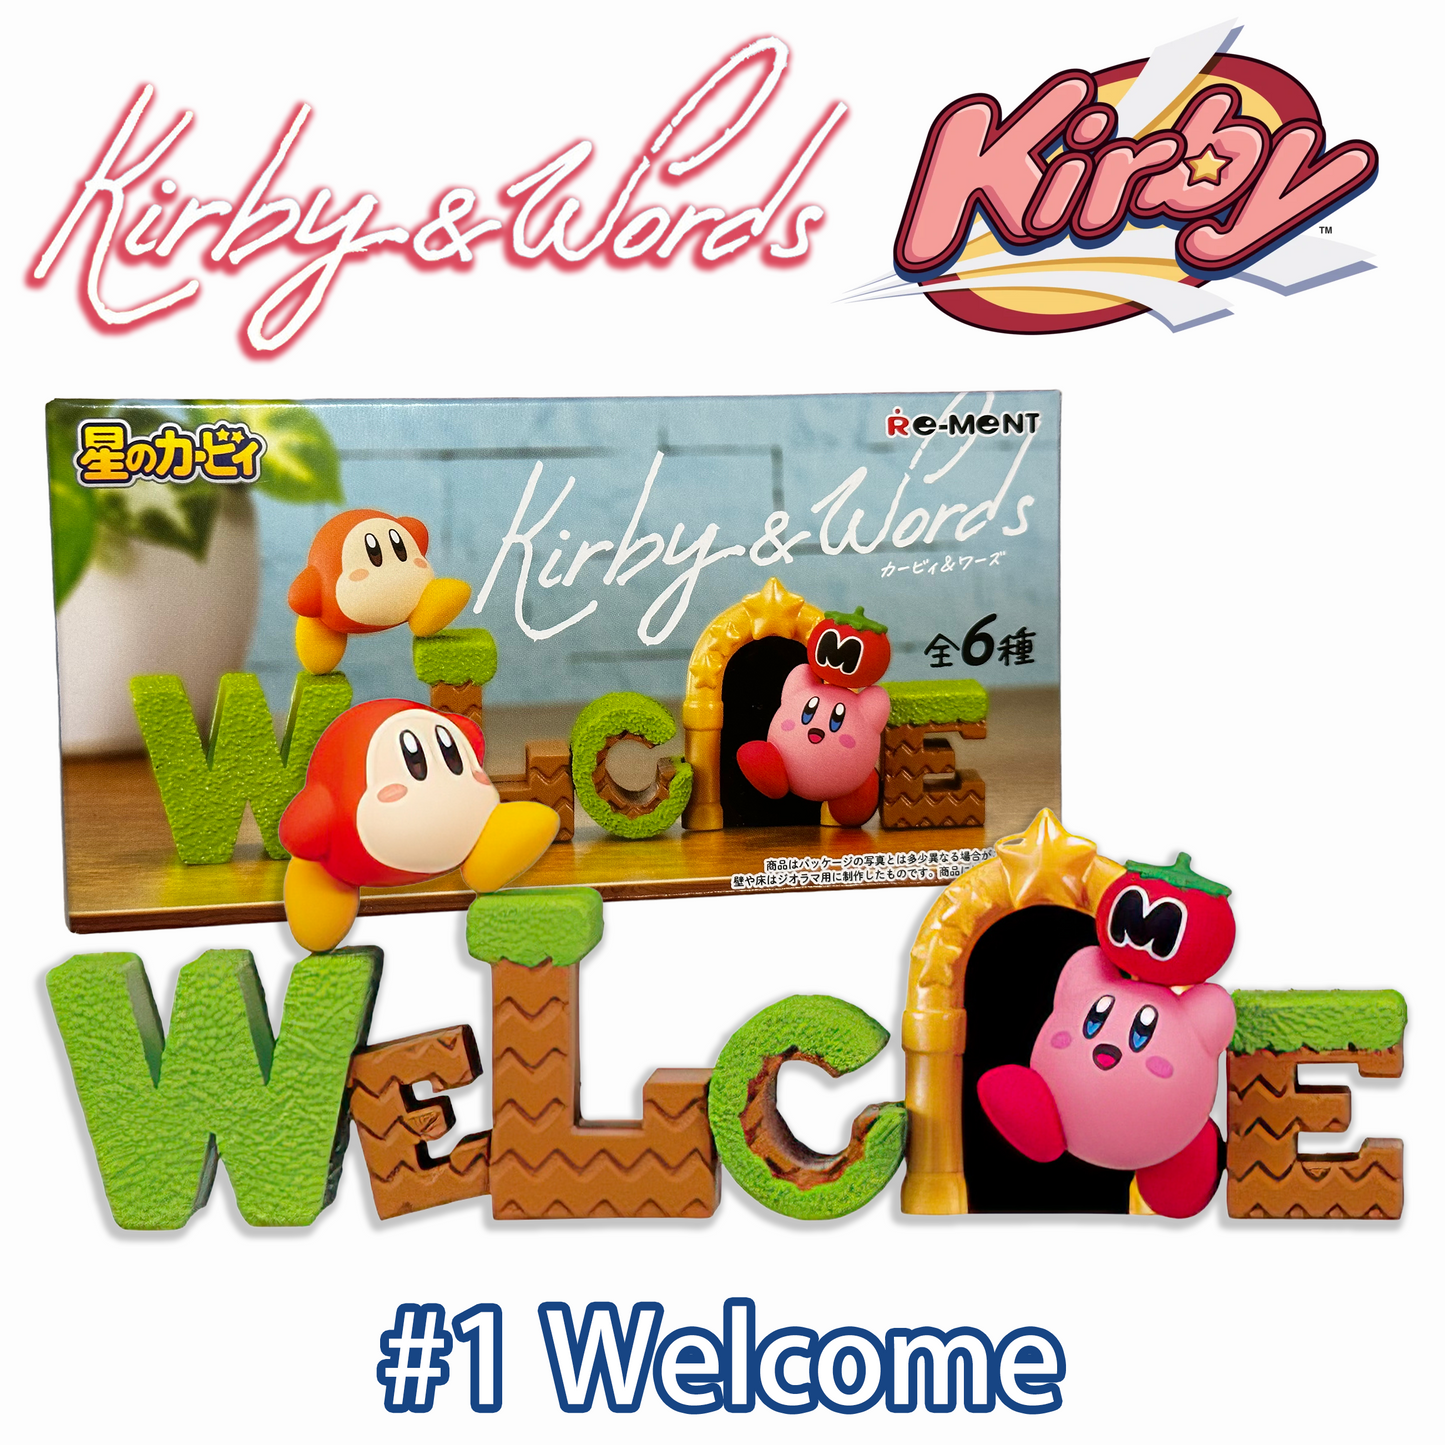 #1 WELCOME - Kirby and Words RE-MENT Collectible Figure (BRAND NEW) From USA!